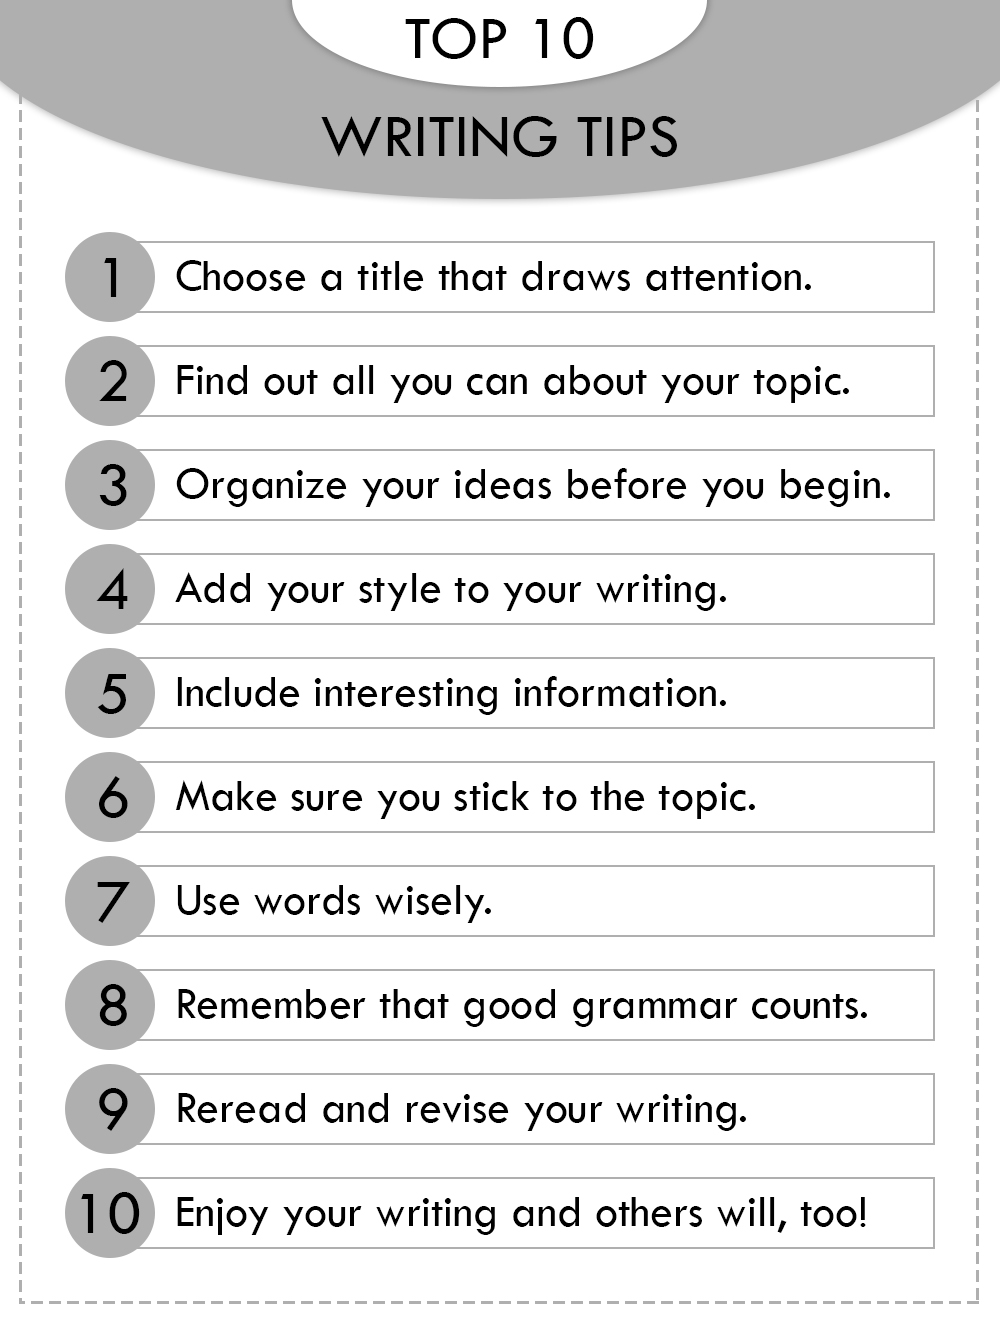 Smart Tips for Writing